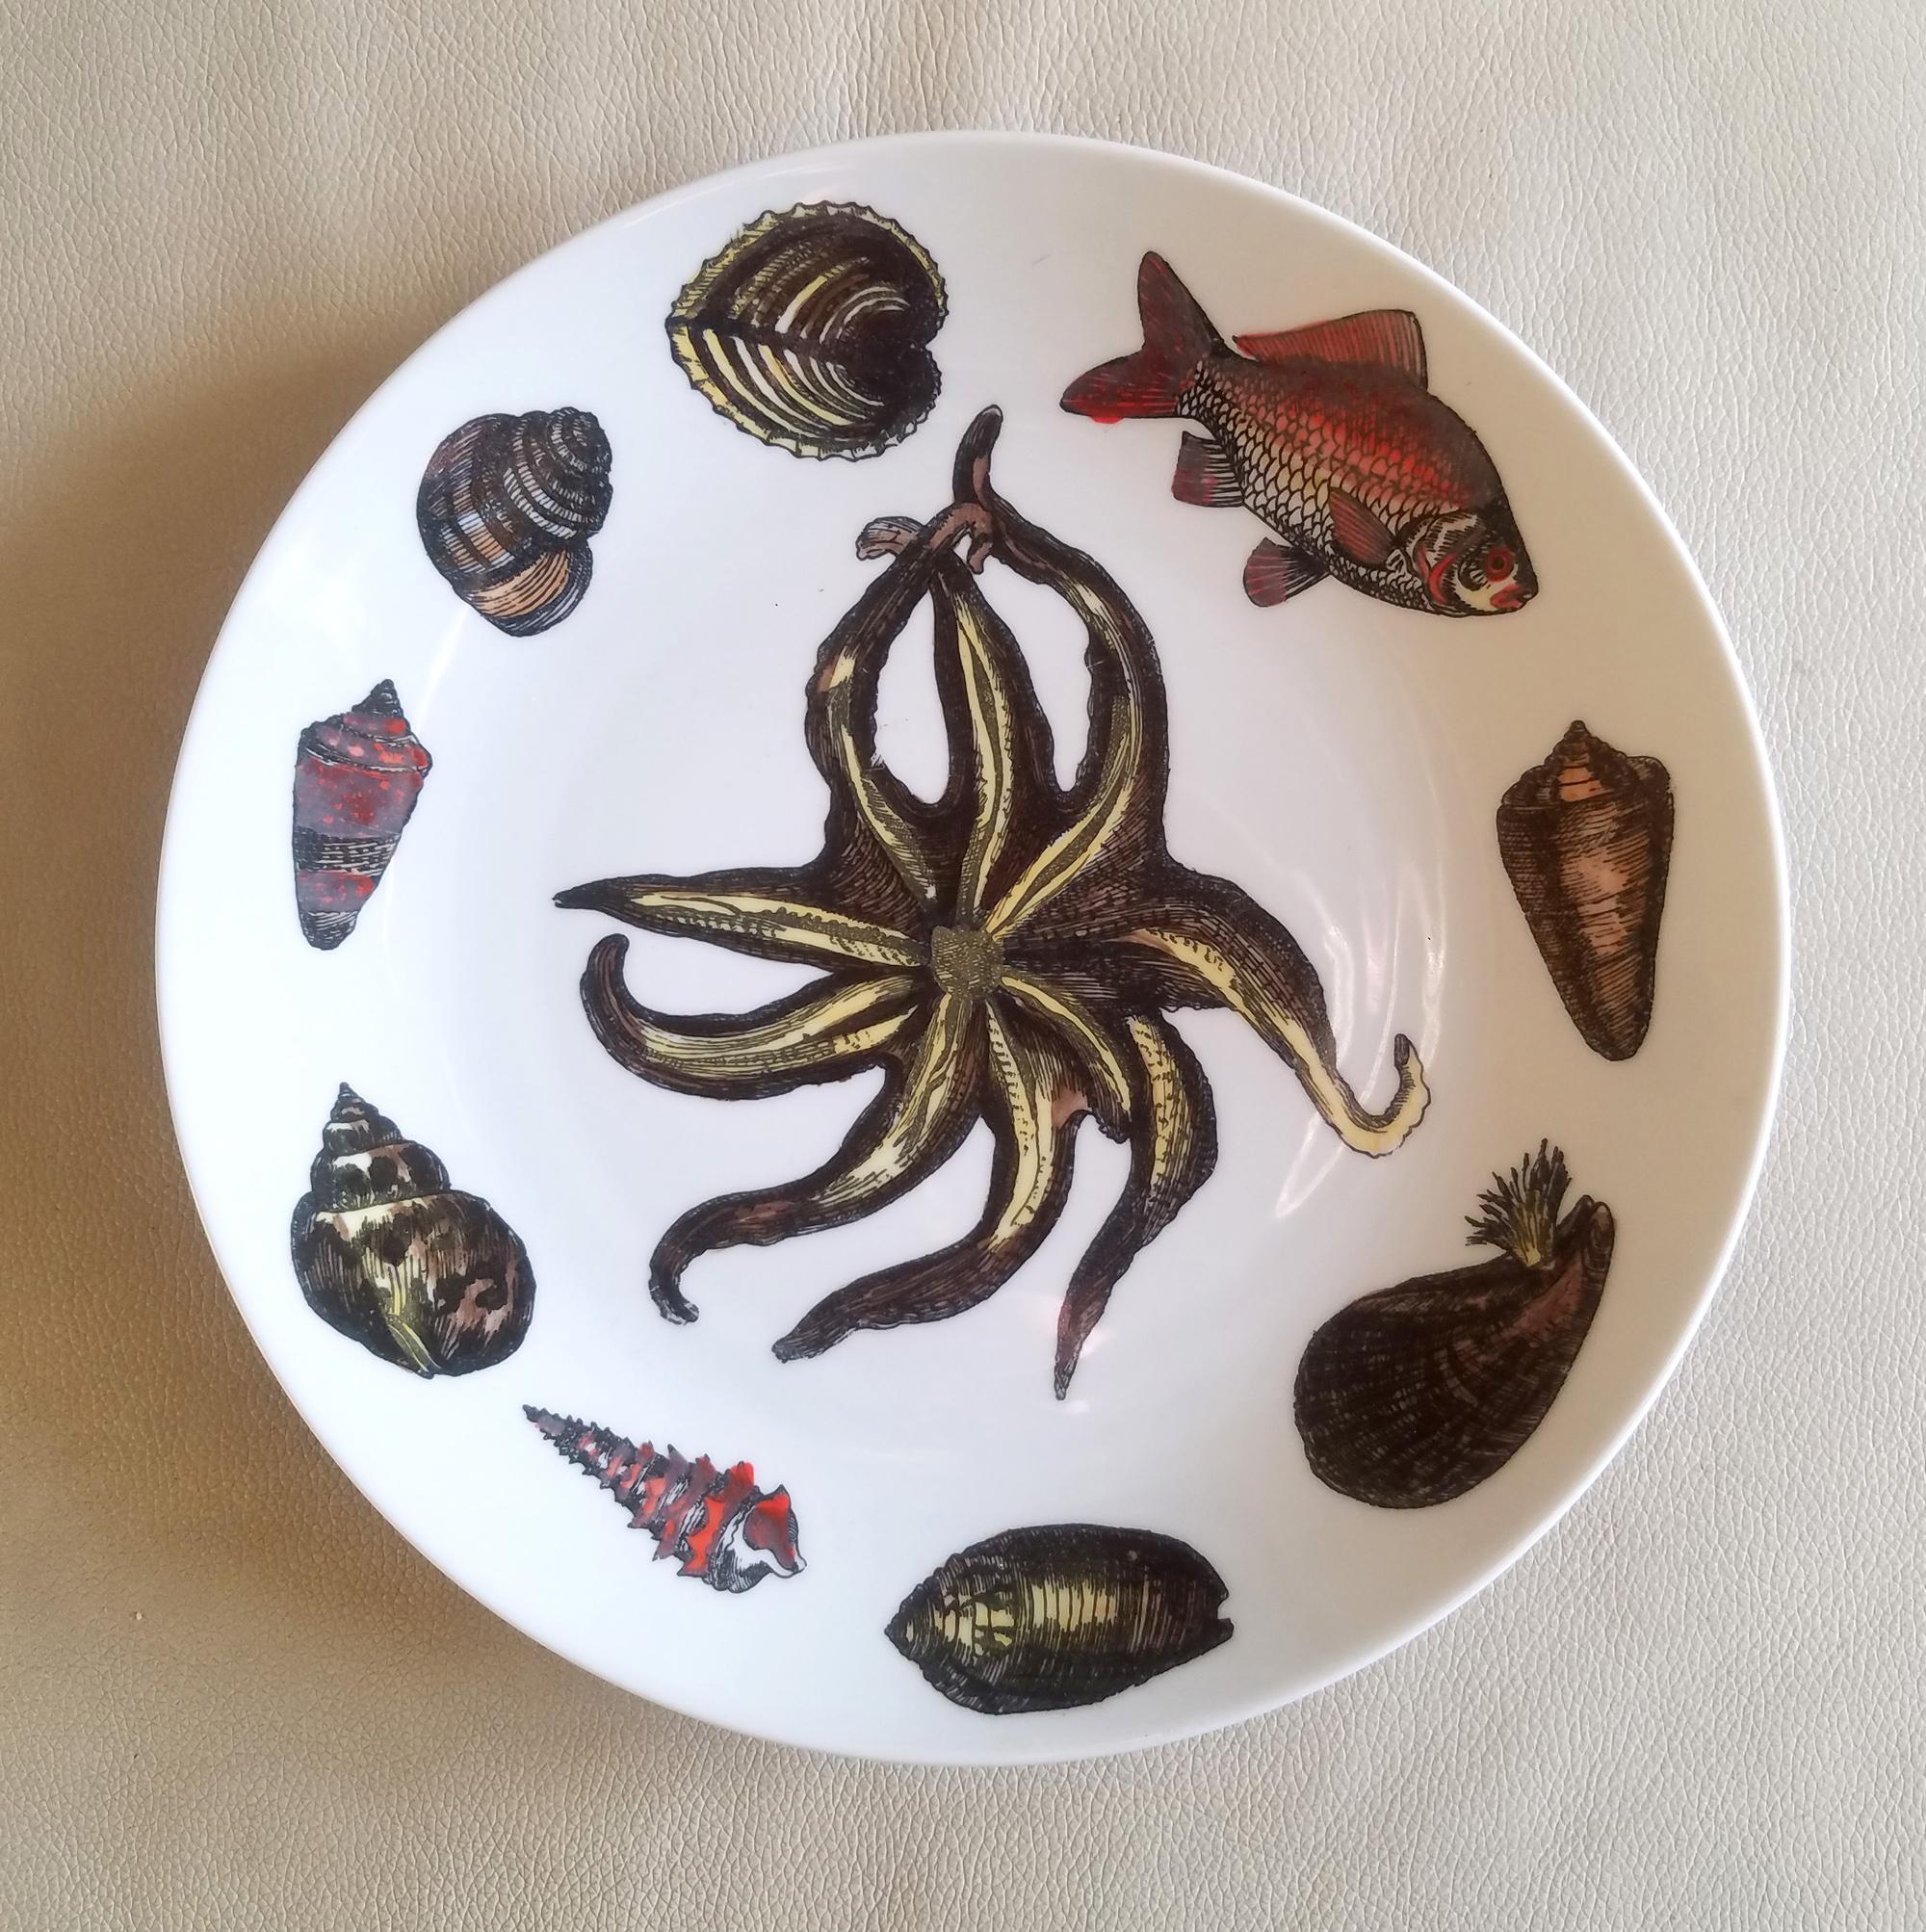 Mid-20th Century Piero Fornasetti Porcelain Conchiglie Seashell Set of Plates with Mollusks For Sale